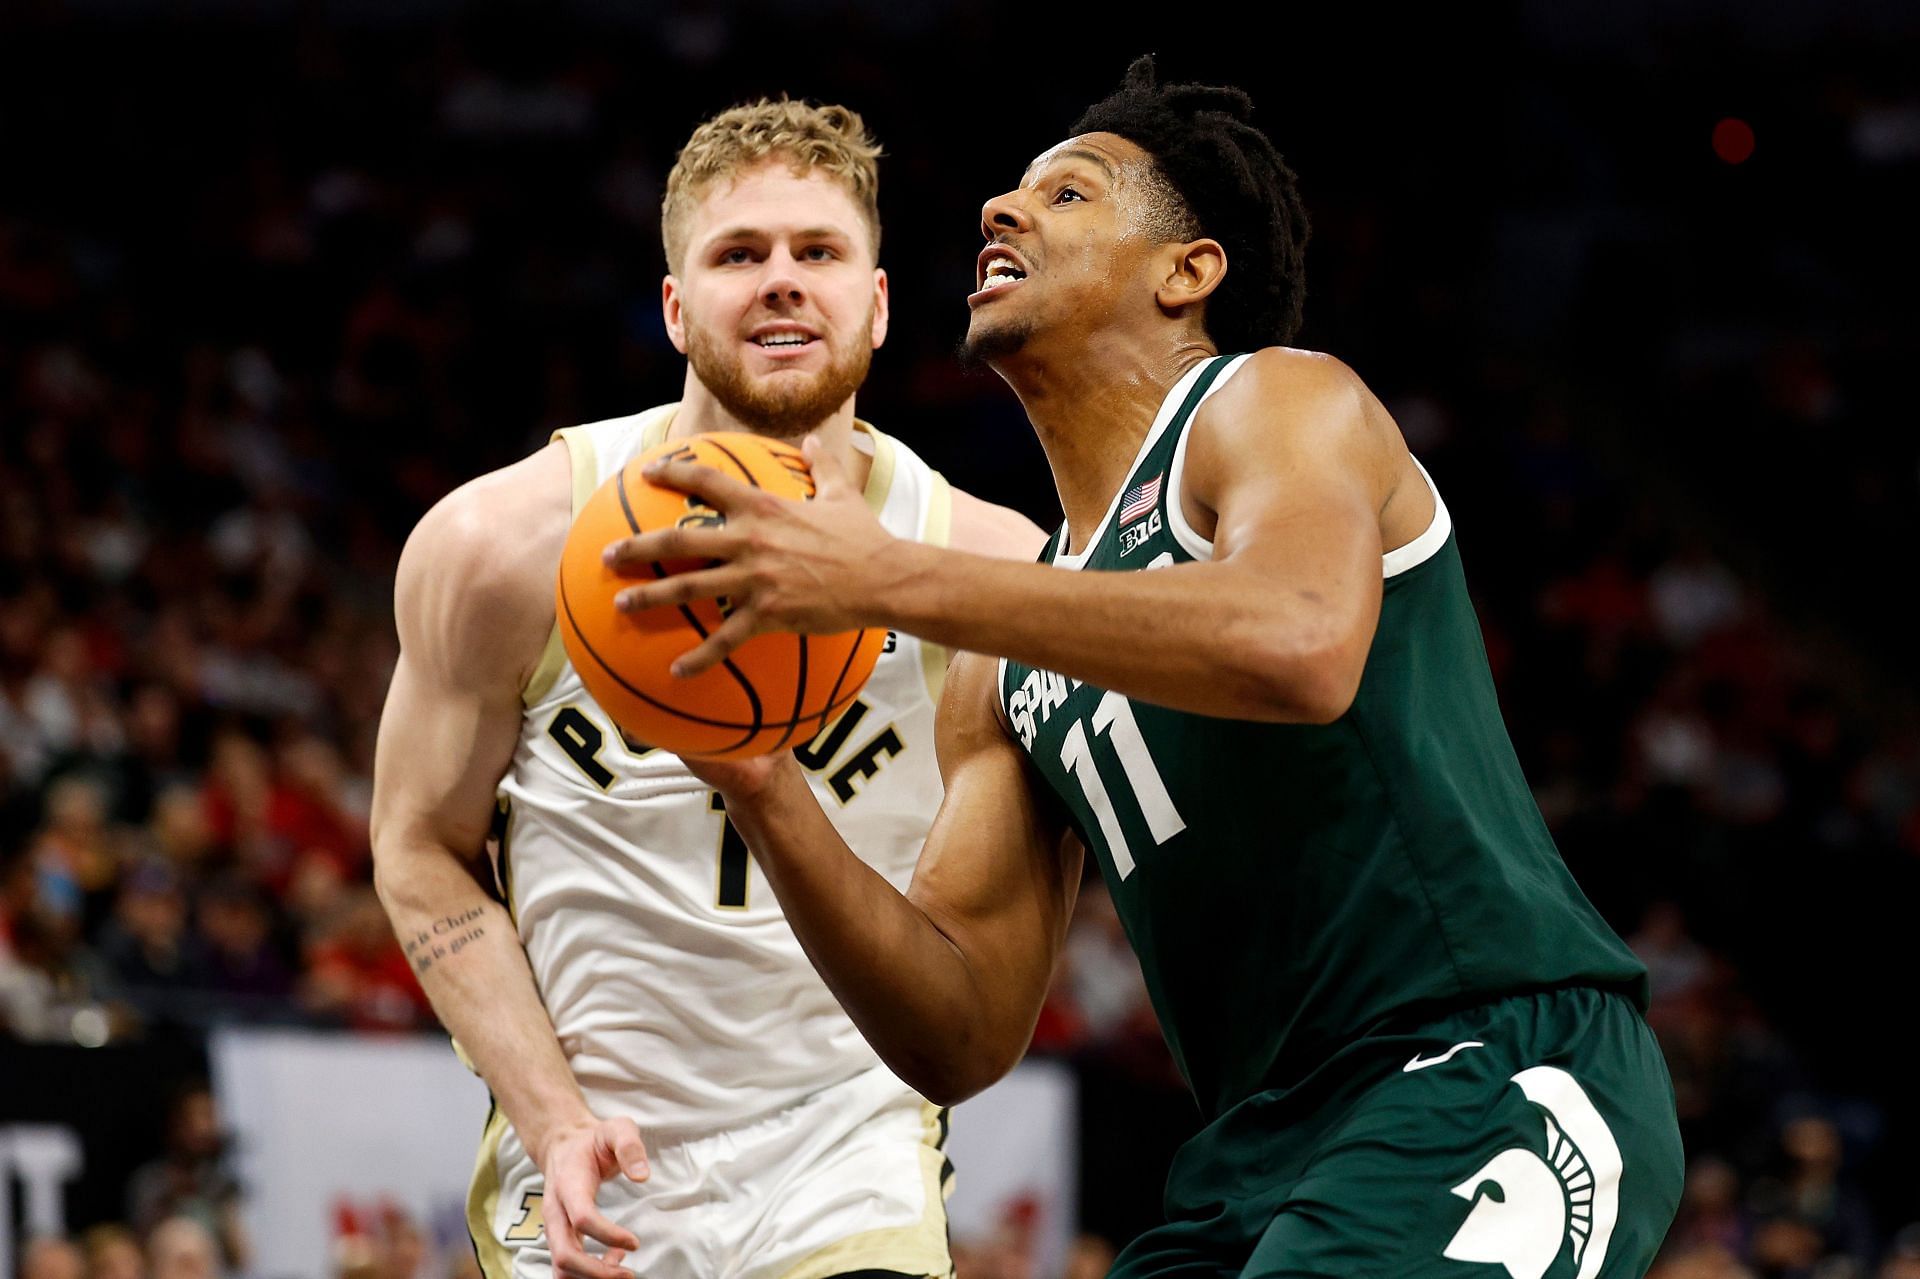 AJ Hoggard is expected to step up for Michigan State in its 2024 NCAA Tournament first-round duel with Mississippi State.